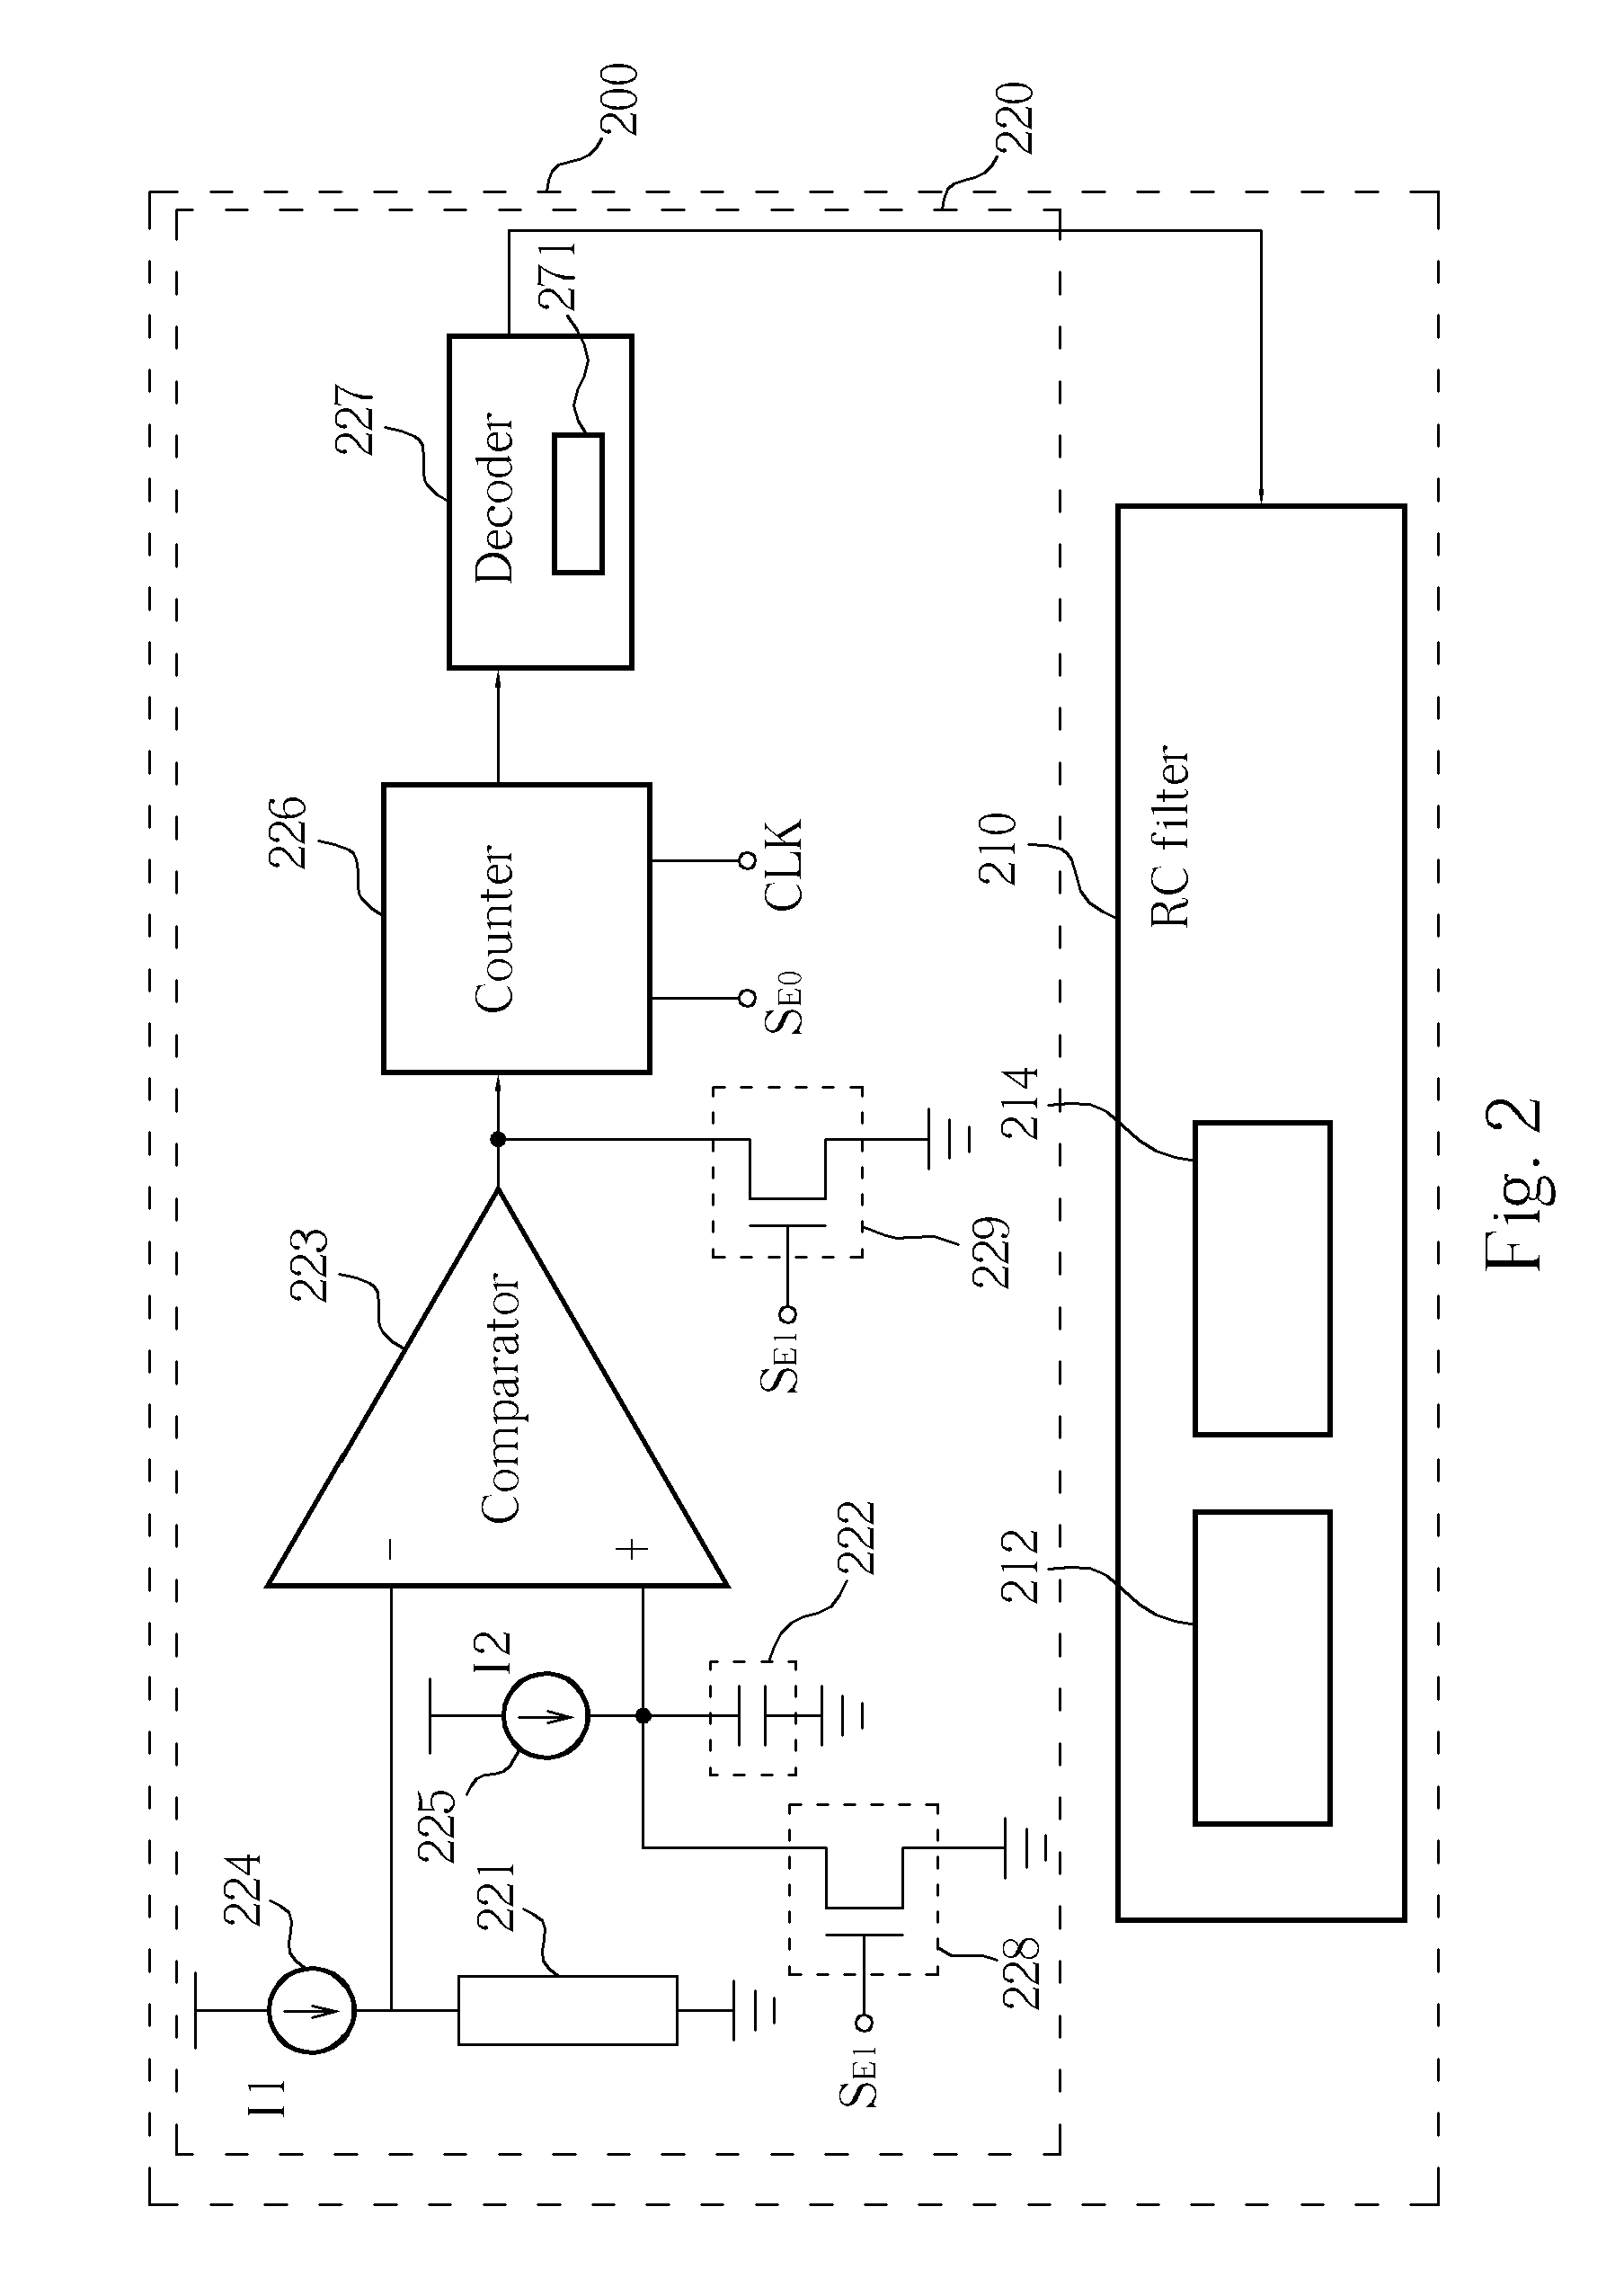 Global Automatic RC Time Constant Tuning Circuit and Method for on Chip RC Filters